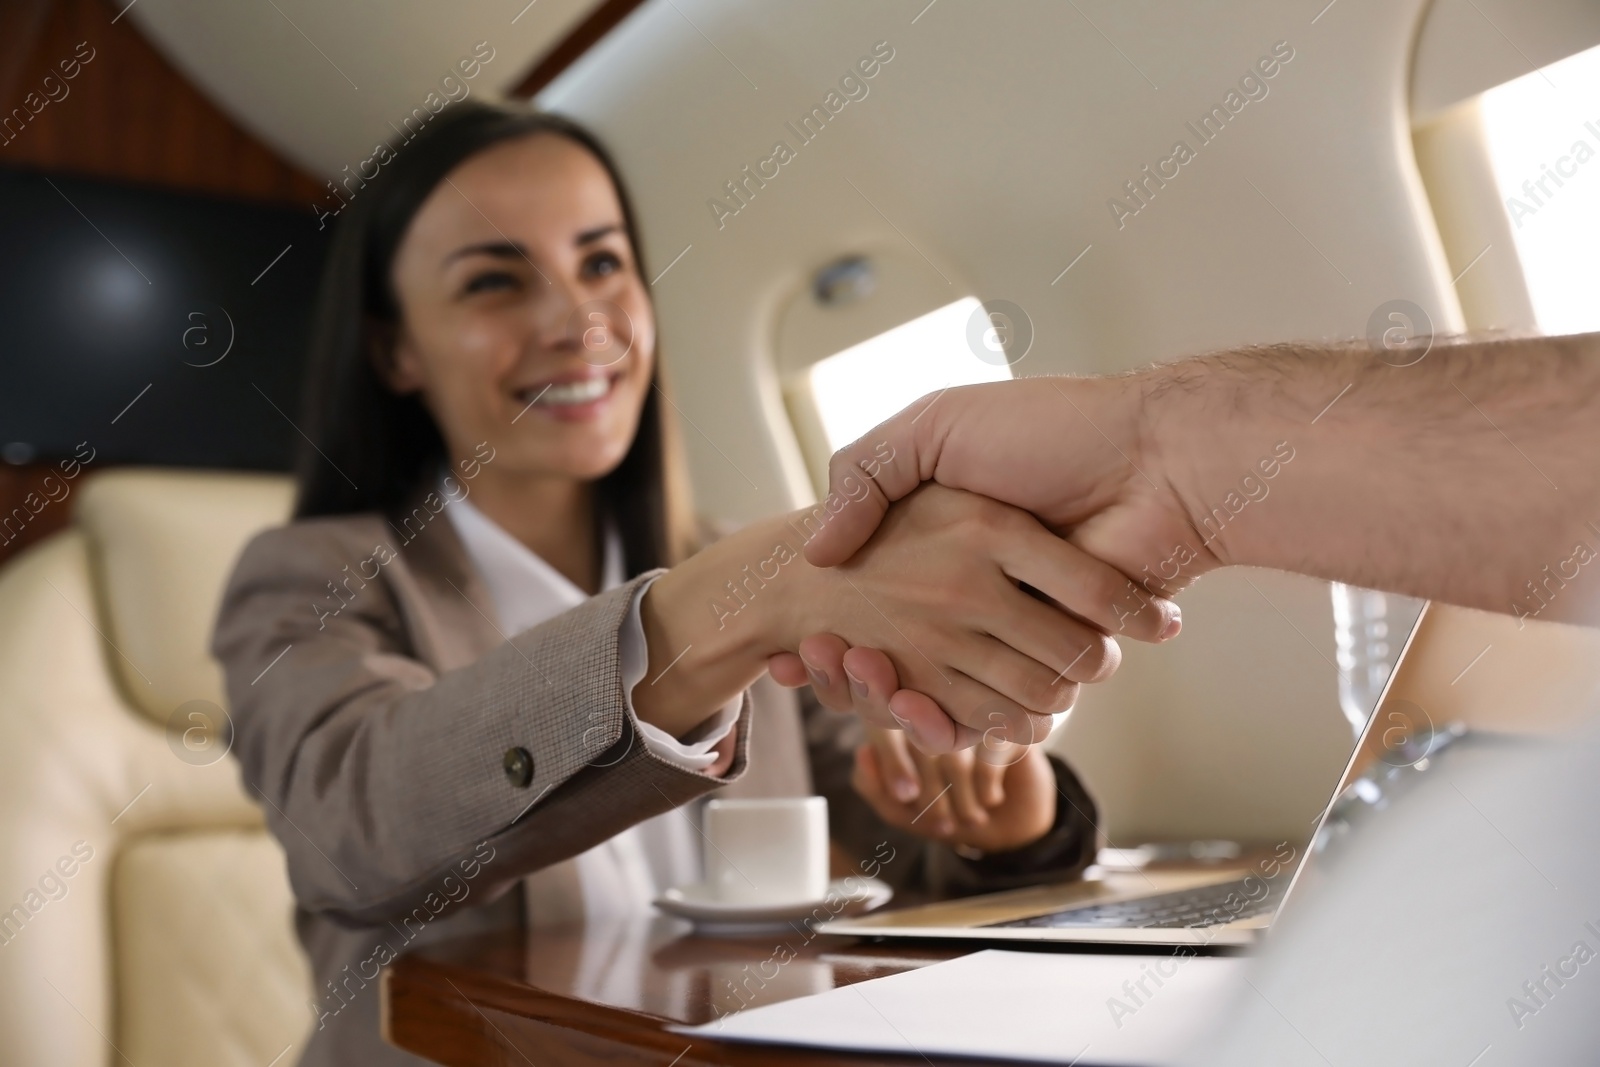 Photo of Colleagues shaking hands in airplane during flight